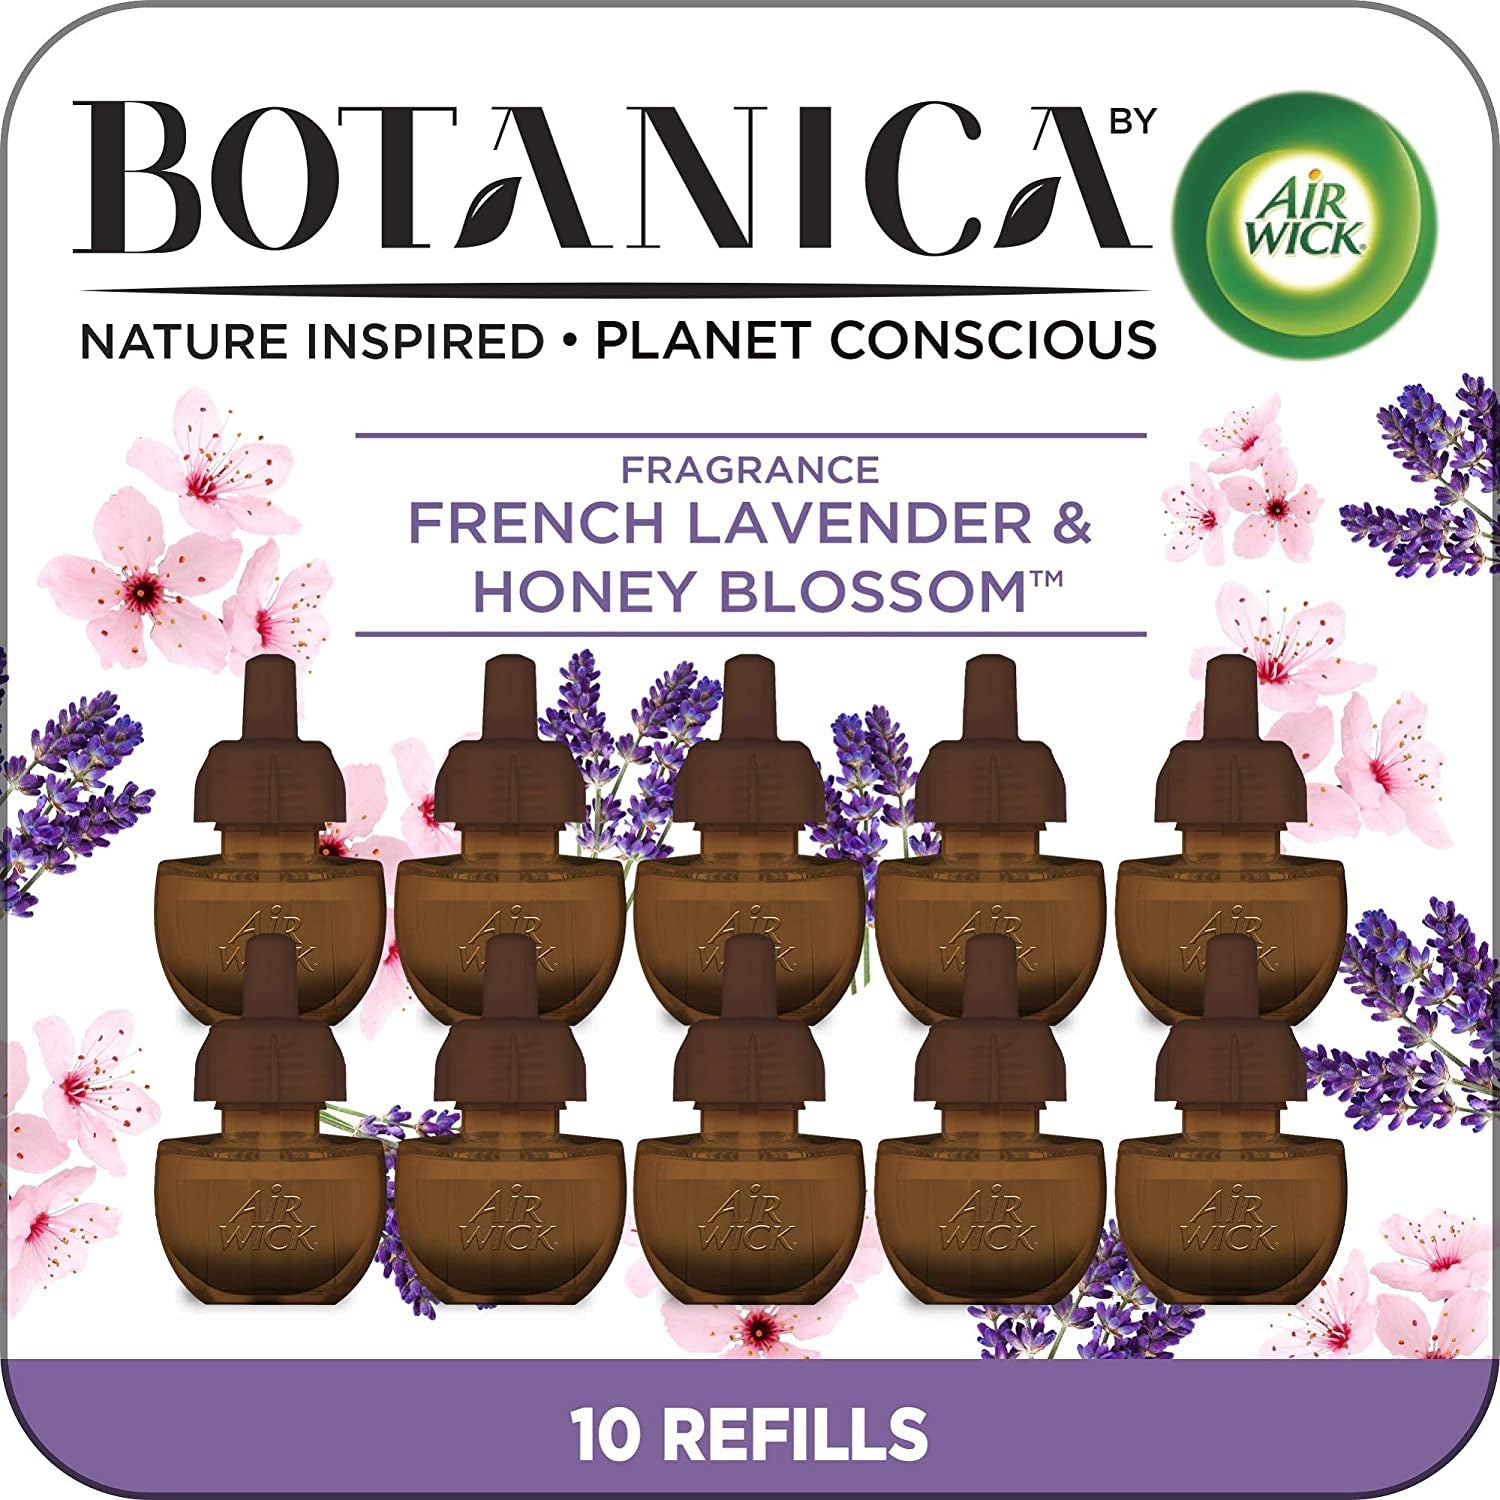 Botanica by  Plug in Scented Oil Refill, 10Ct, French Lavender and Honey Blossom, Air Freshener, Eco Friendly, Essential Oils